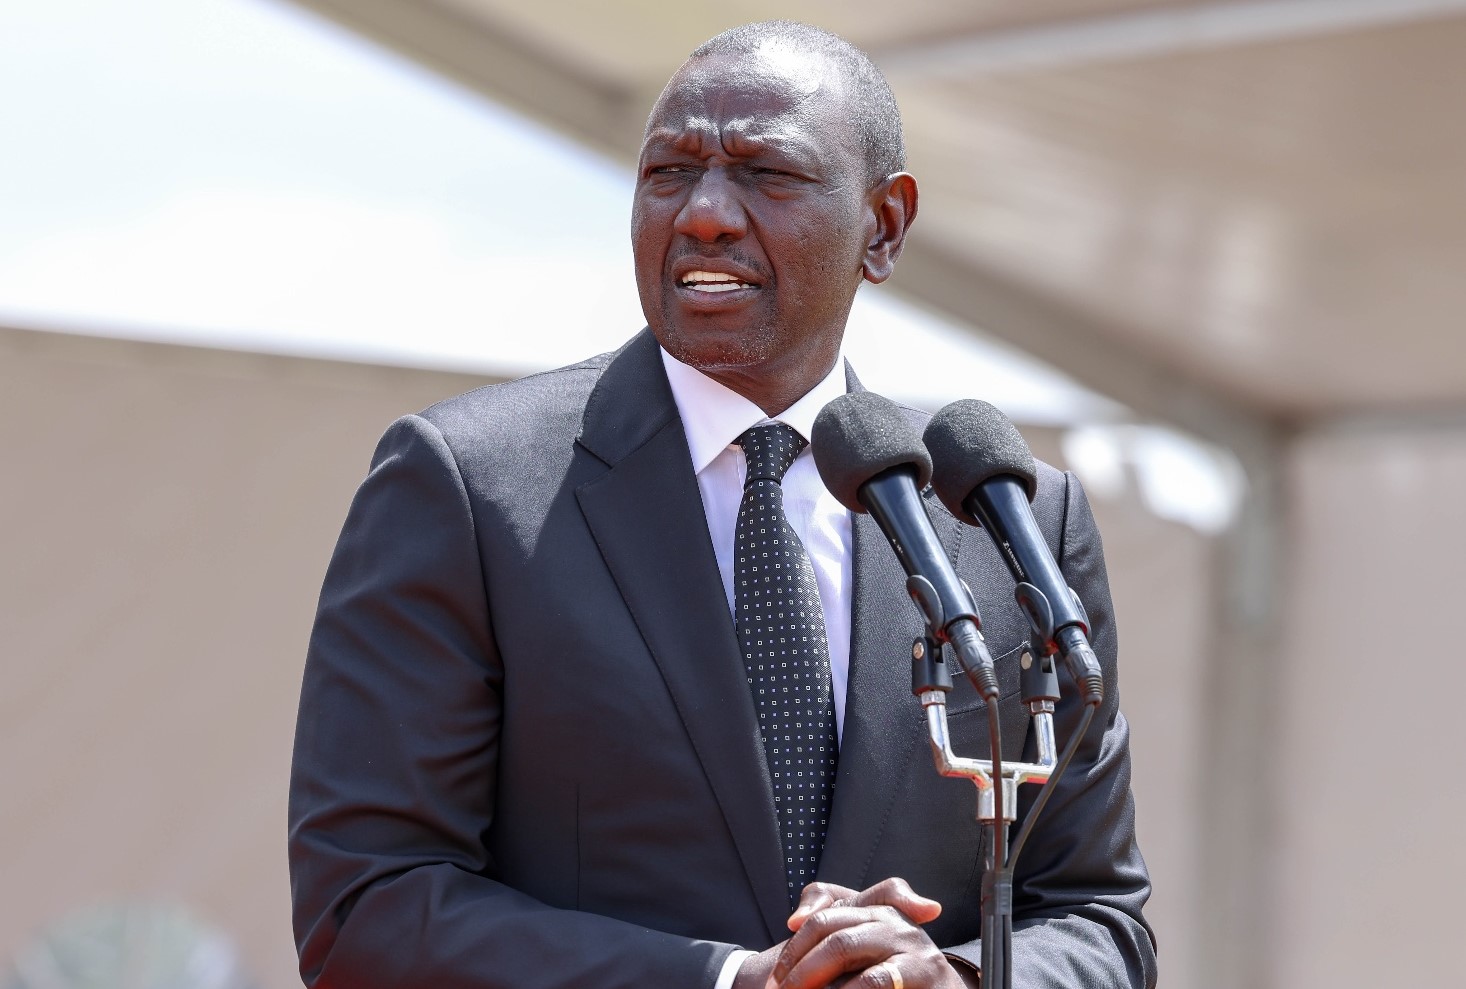 Featured image for "It should never happen again!" Ruto says as he mourns slain Magistrate Kivuti